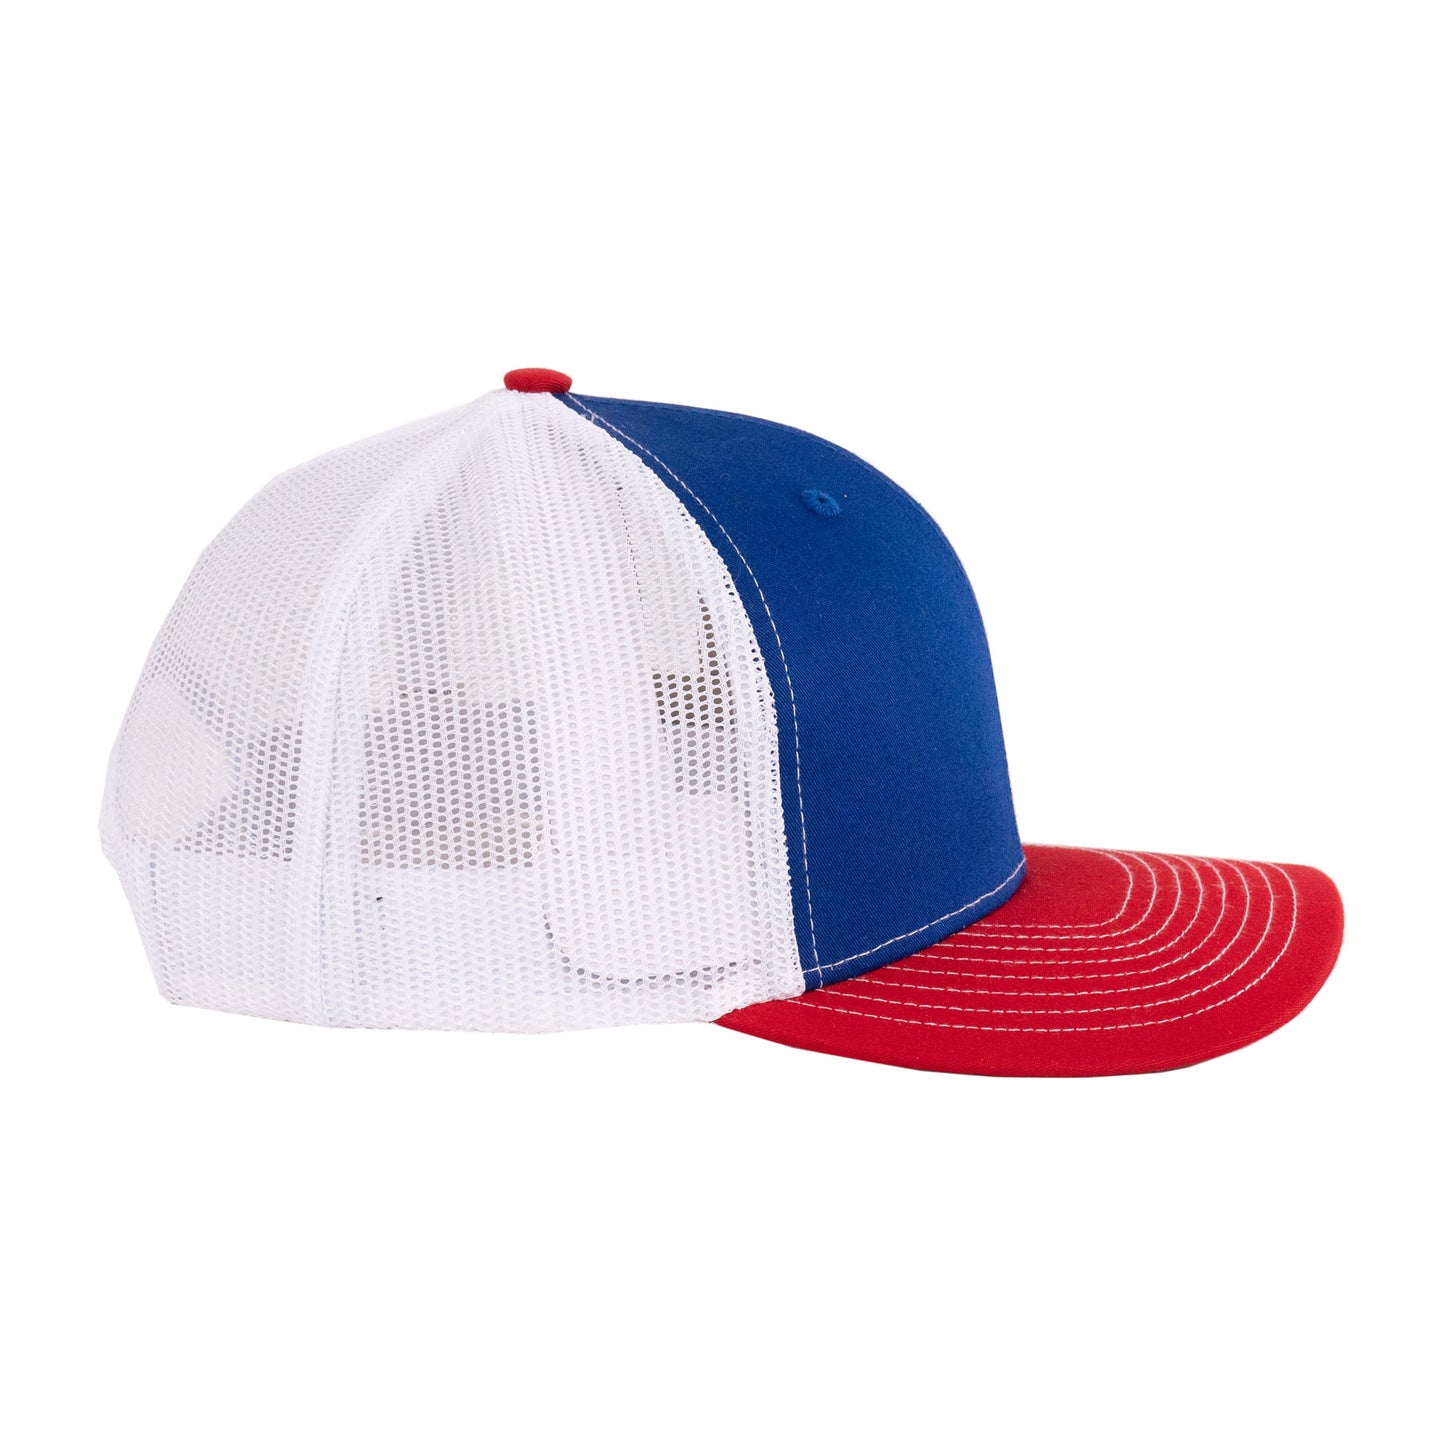 Tanglefree Trucker Hat Red White & Blue – Tanglefree Shop